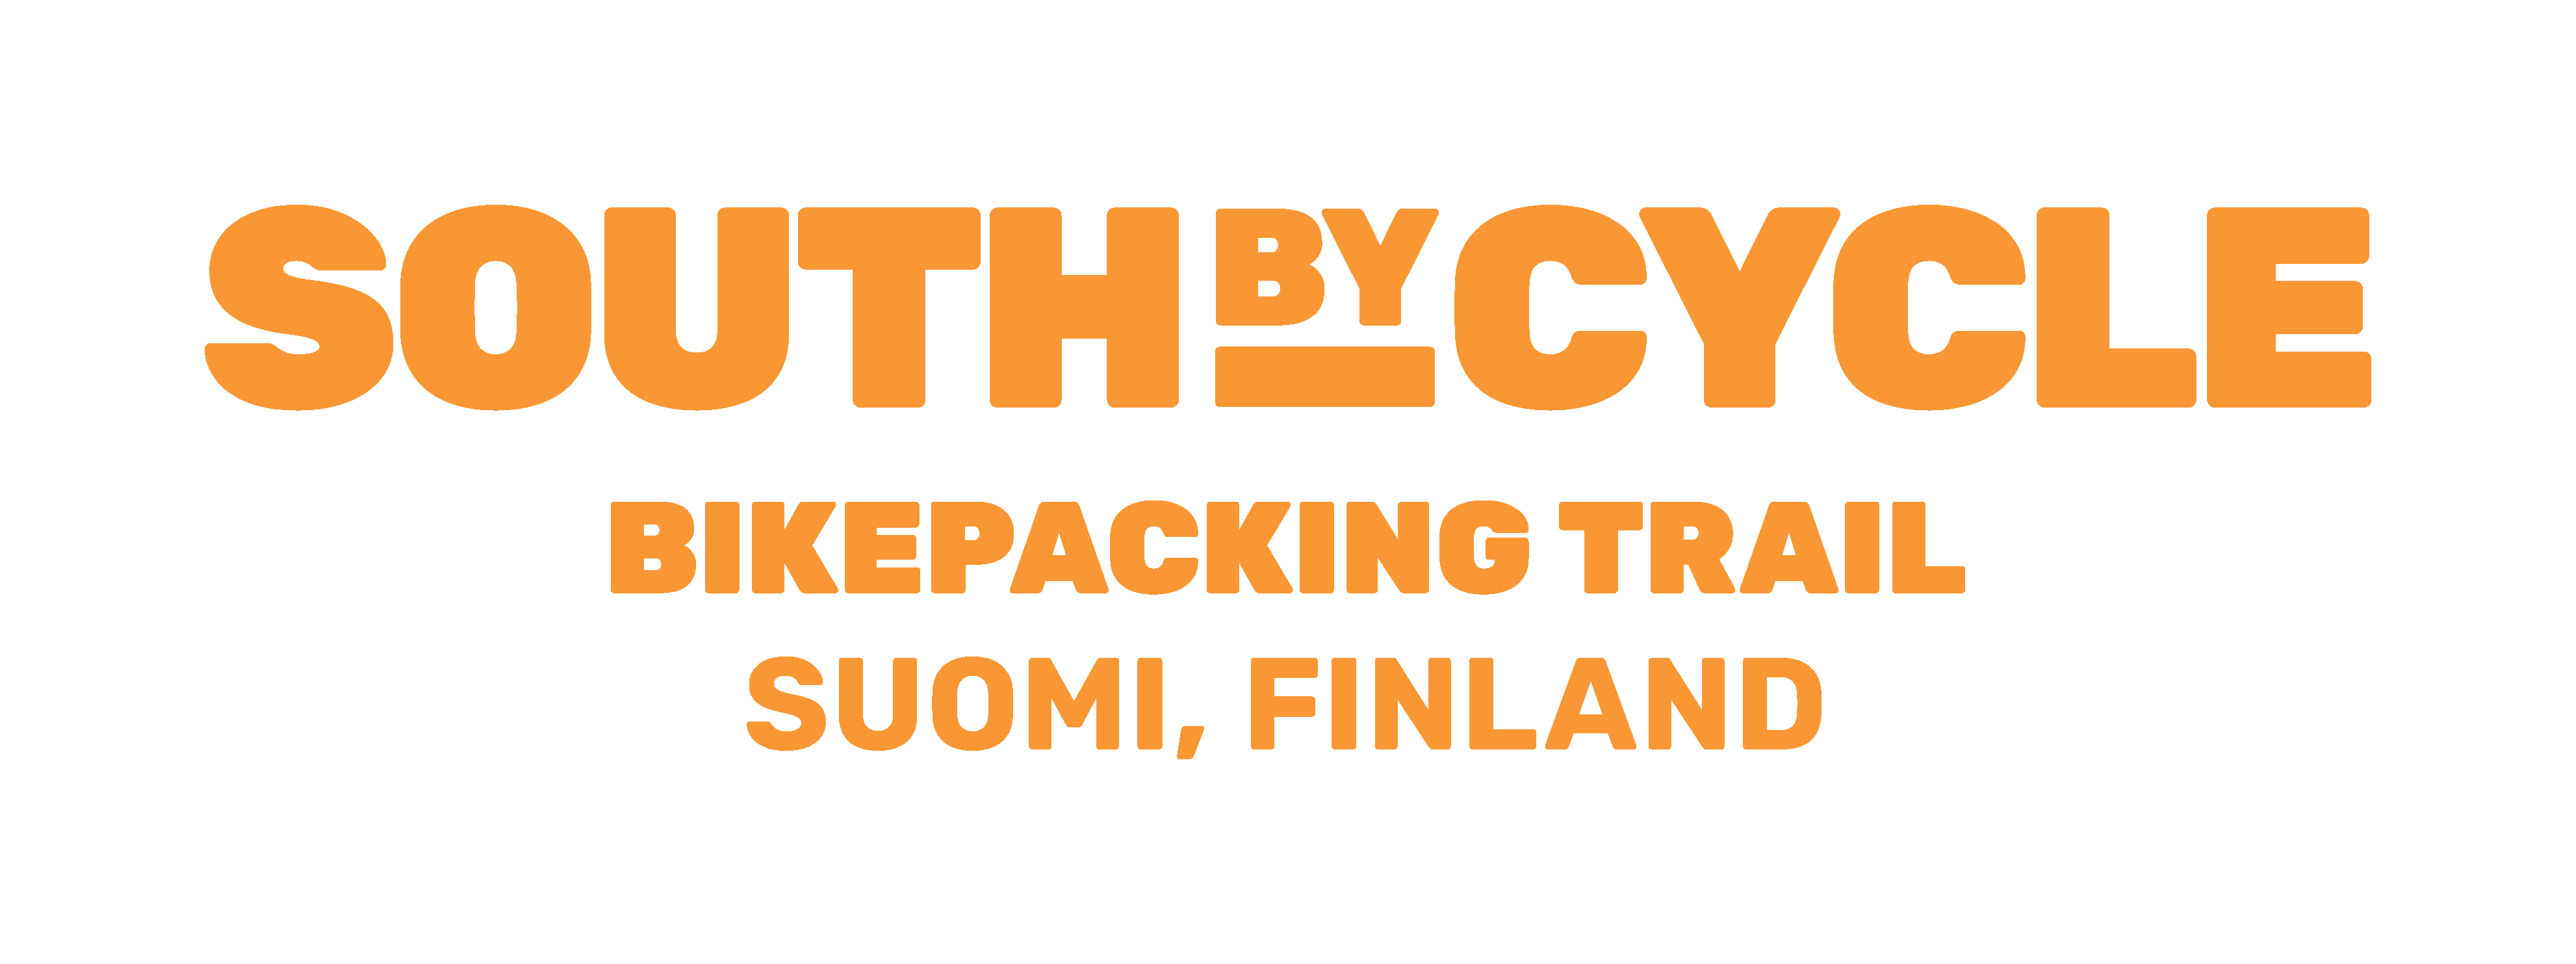 Oranssi South by Cycle -logo, alla slogan Bikepacking Trail Suomi Finland